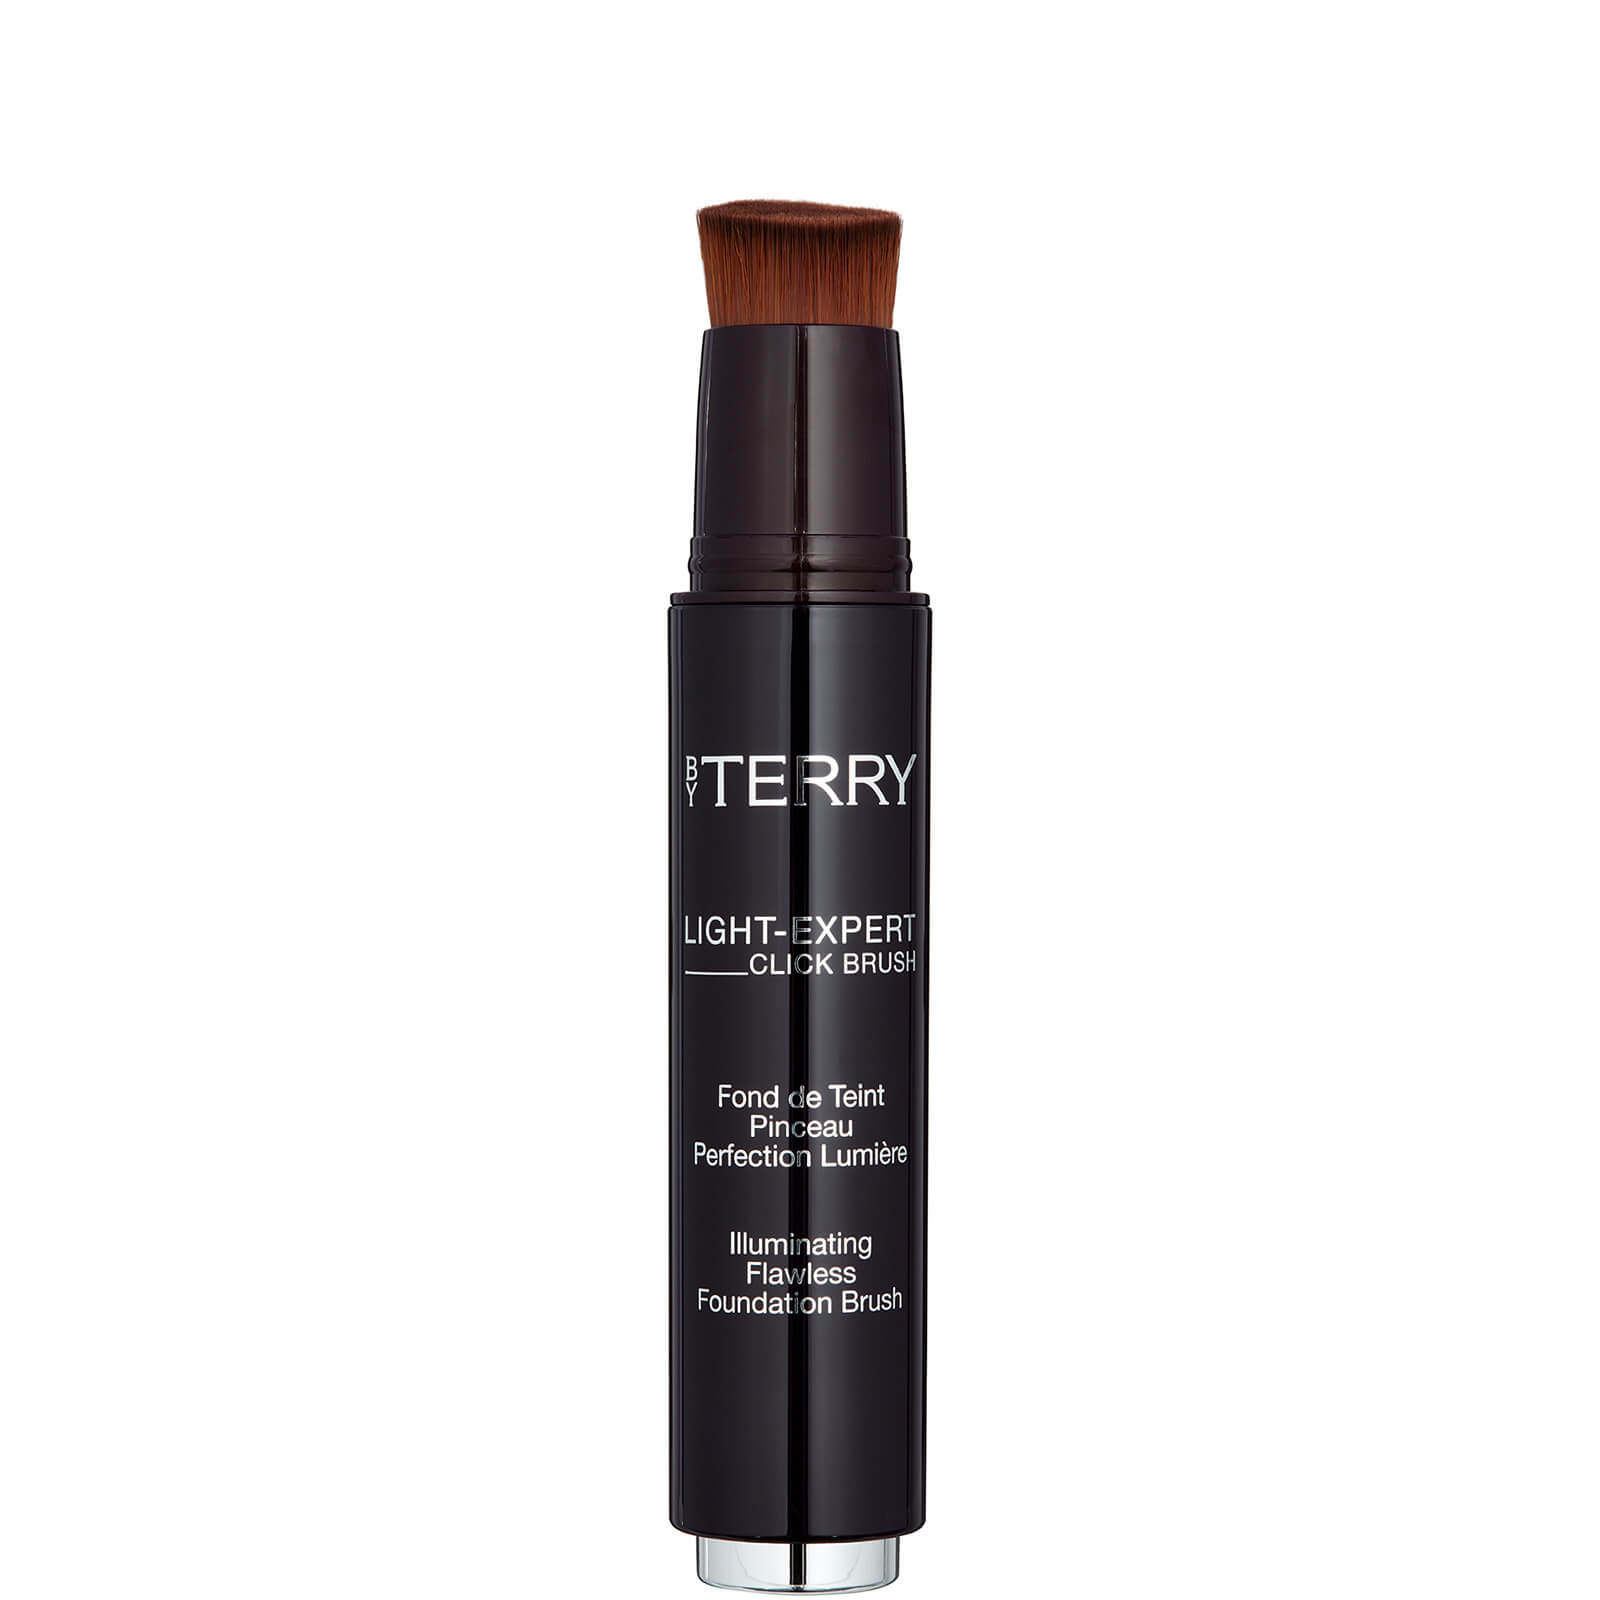 By Terry Light-Expert Click Brush Foundation 19.5ml (Various Shades) - 11. Amber Brown